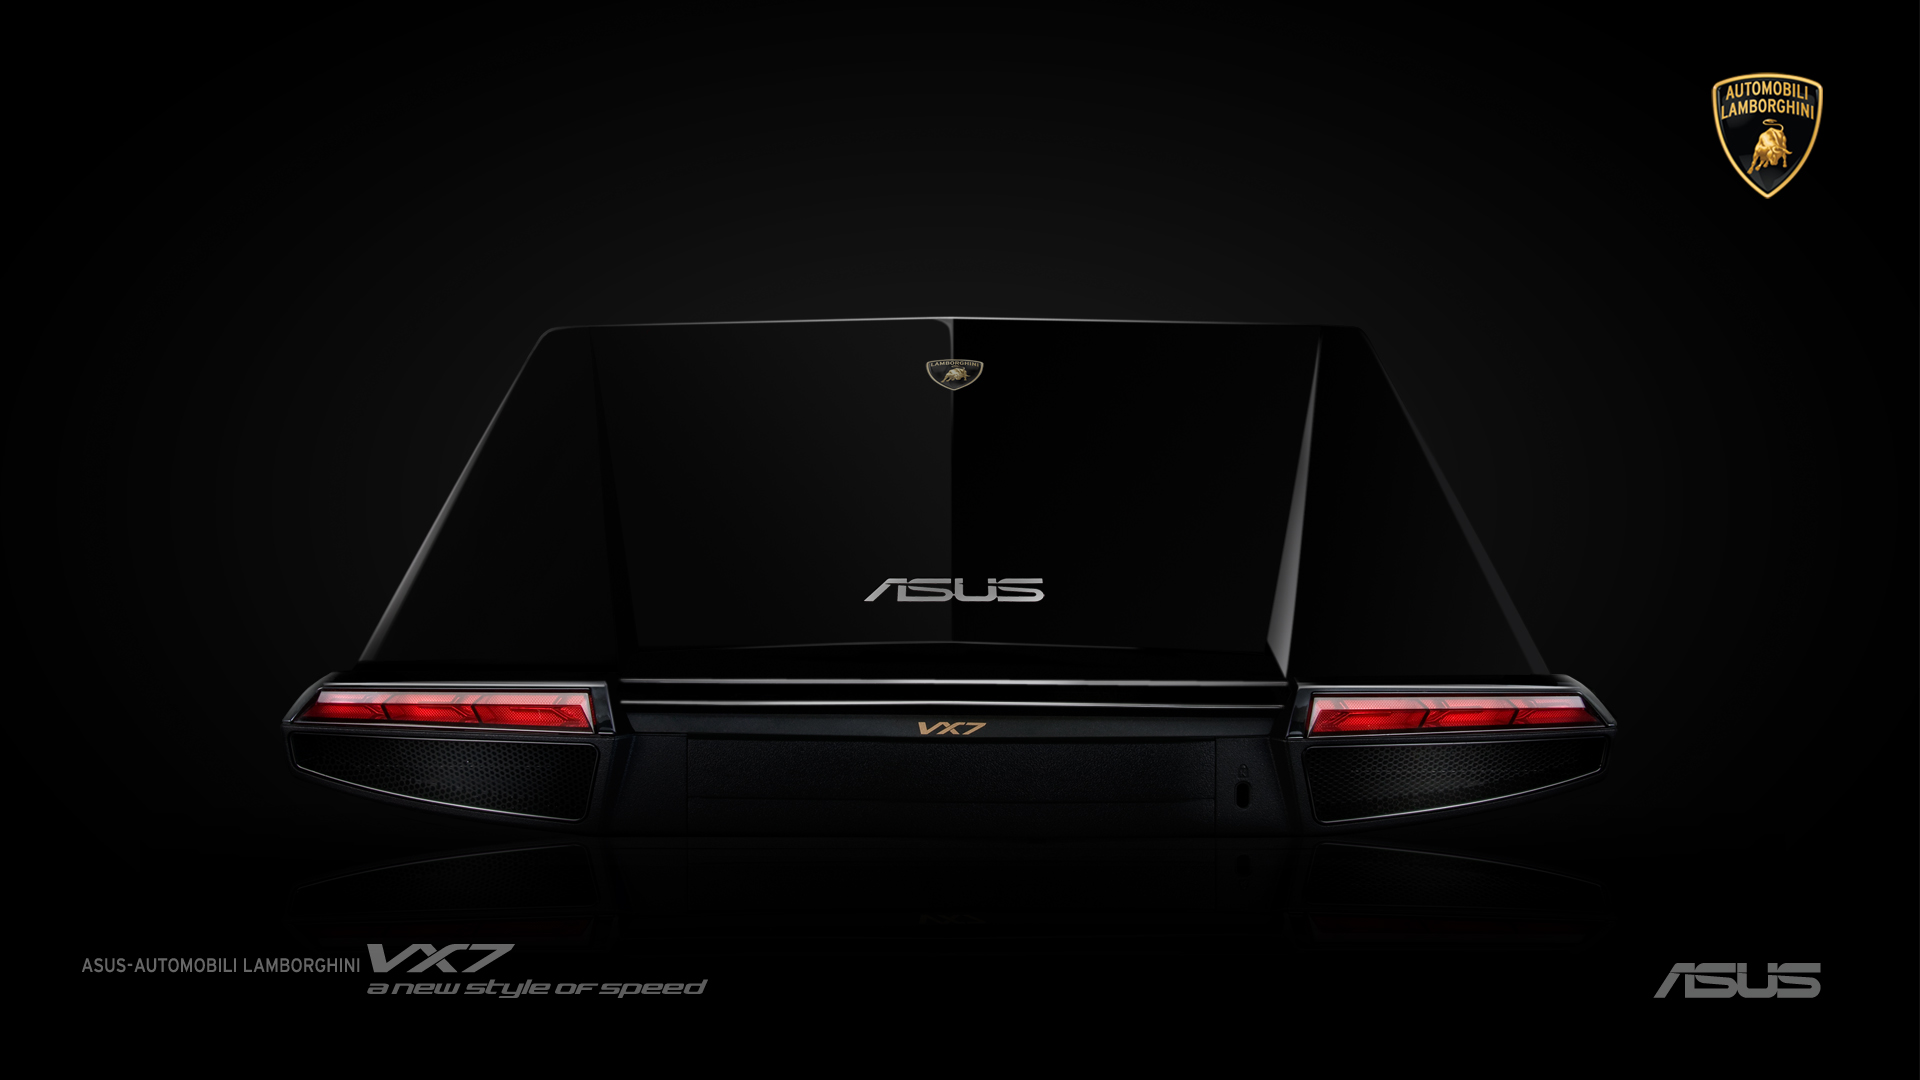 Asus Gaming Laptop Wallpaper Images Pictures   Becuo